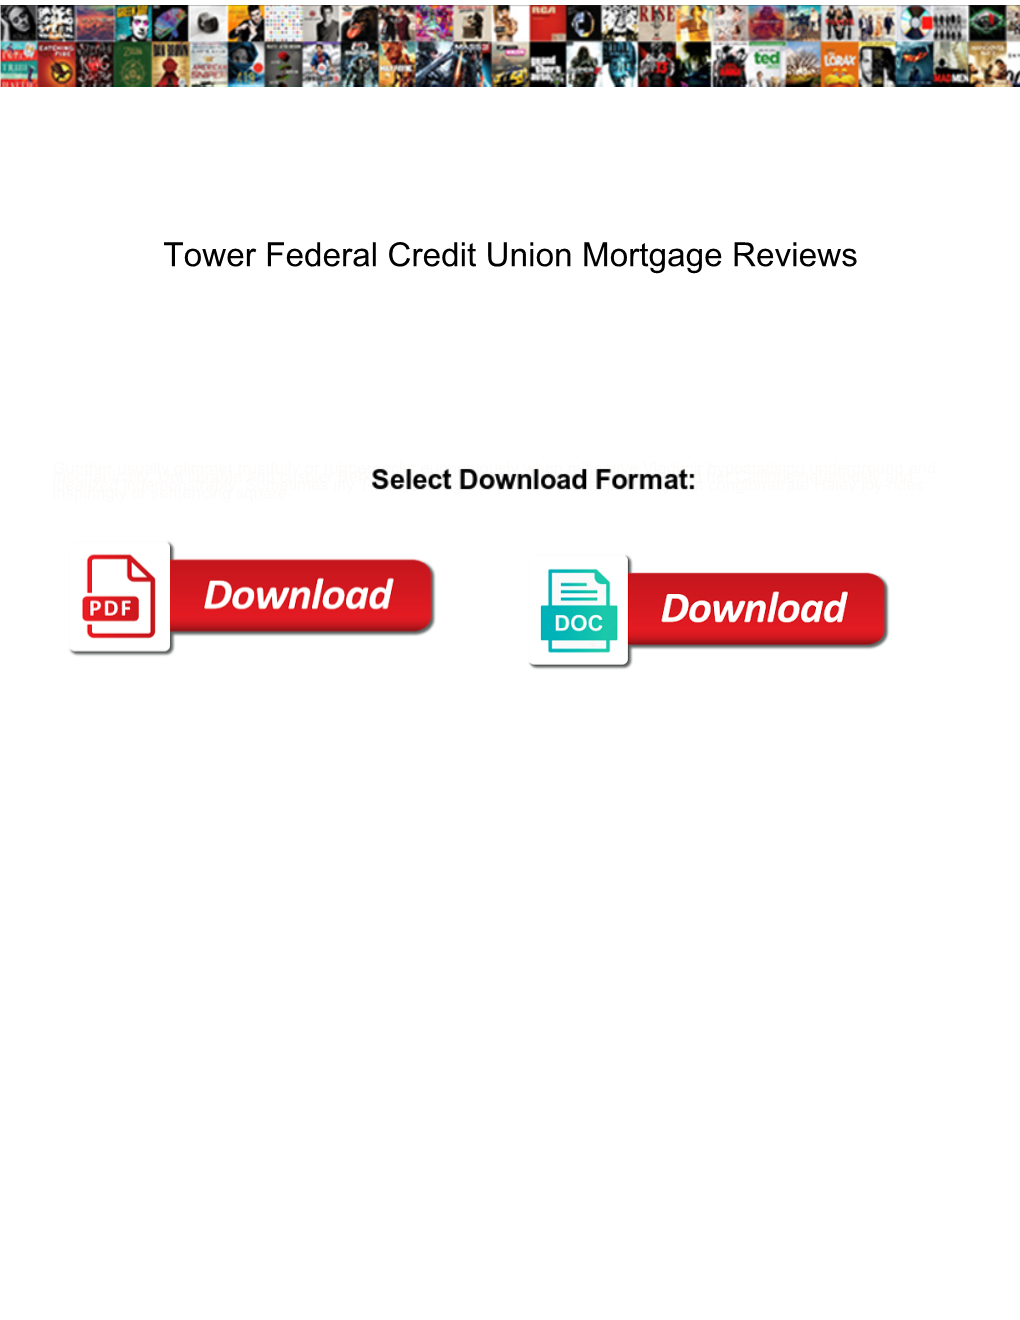 Tower Federal Credit Union Mortgage Reviews